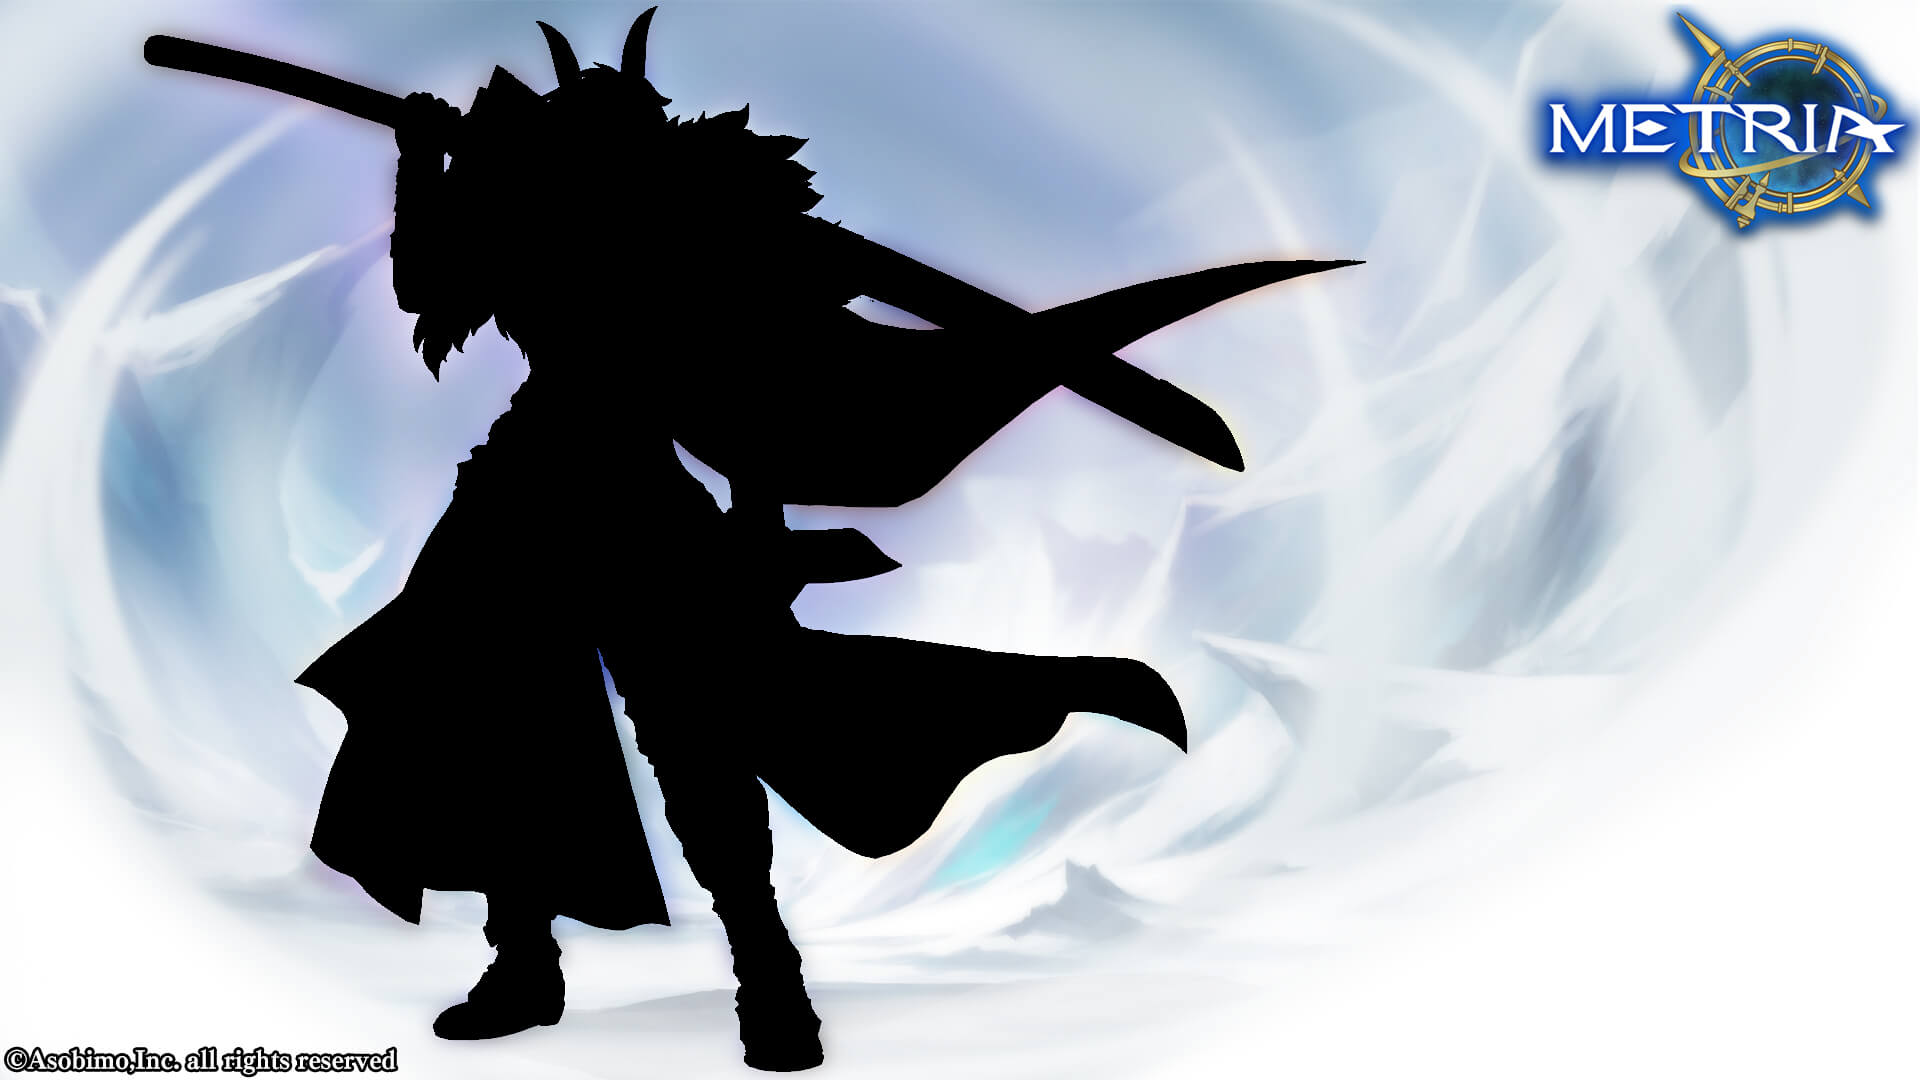 Coming soon! The silhouette of new SSR character revealed!